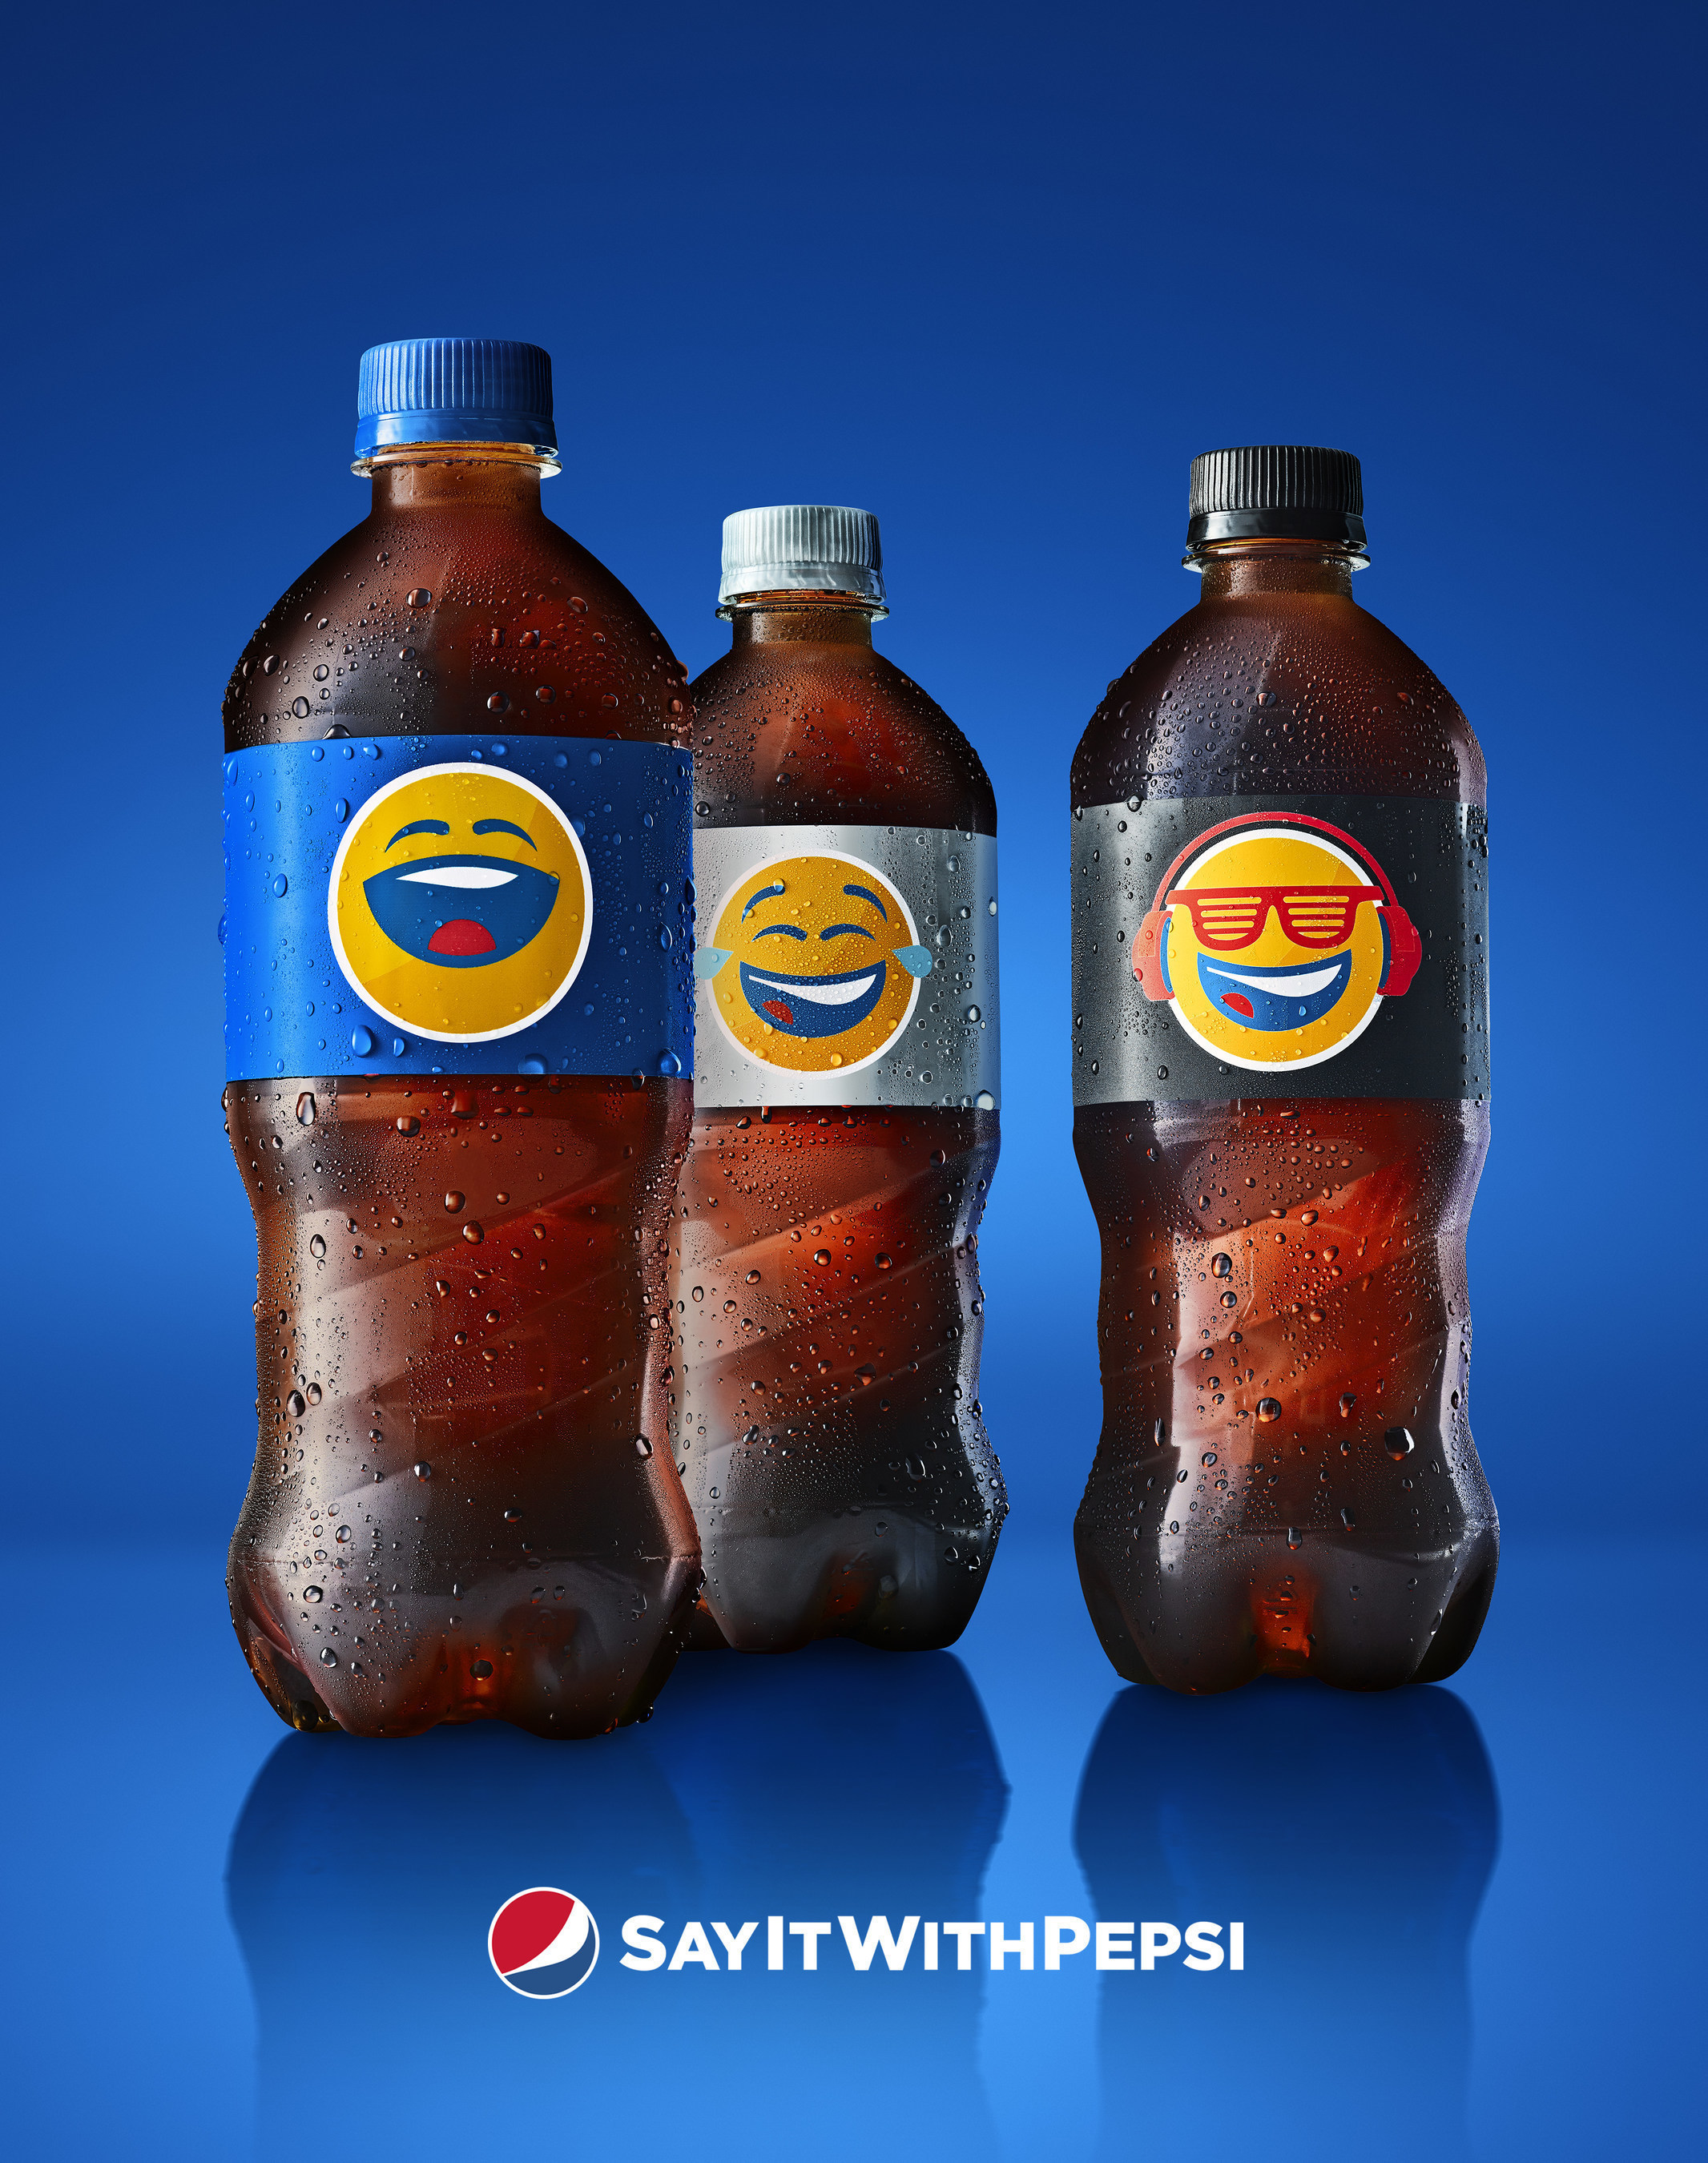 Pepsi Unveils All New Emoji Collection So Fans Can #SayItWithPepsi